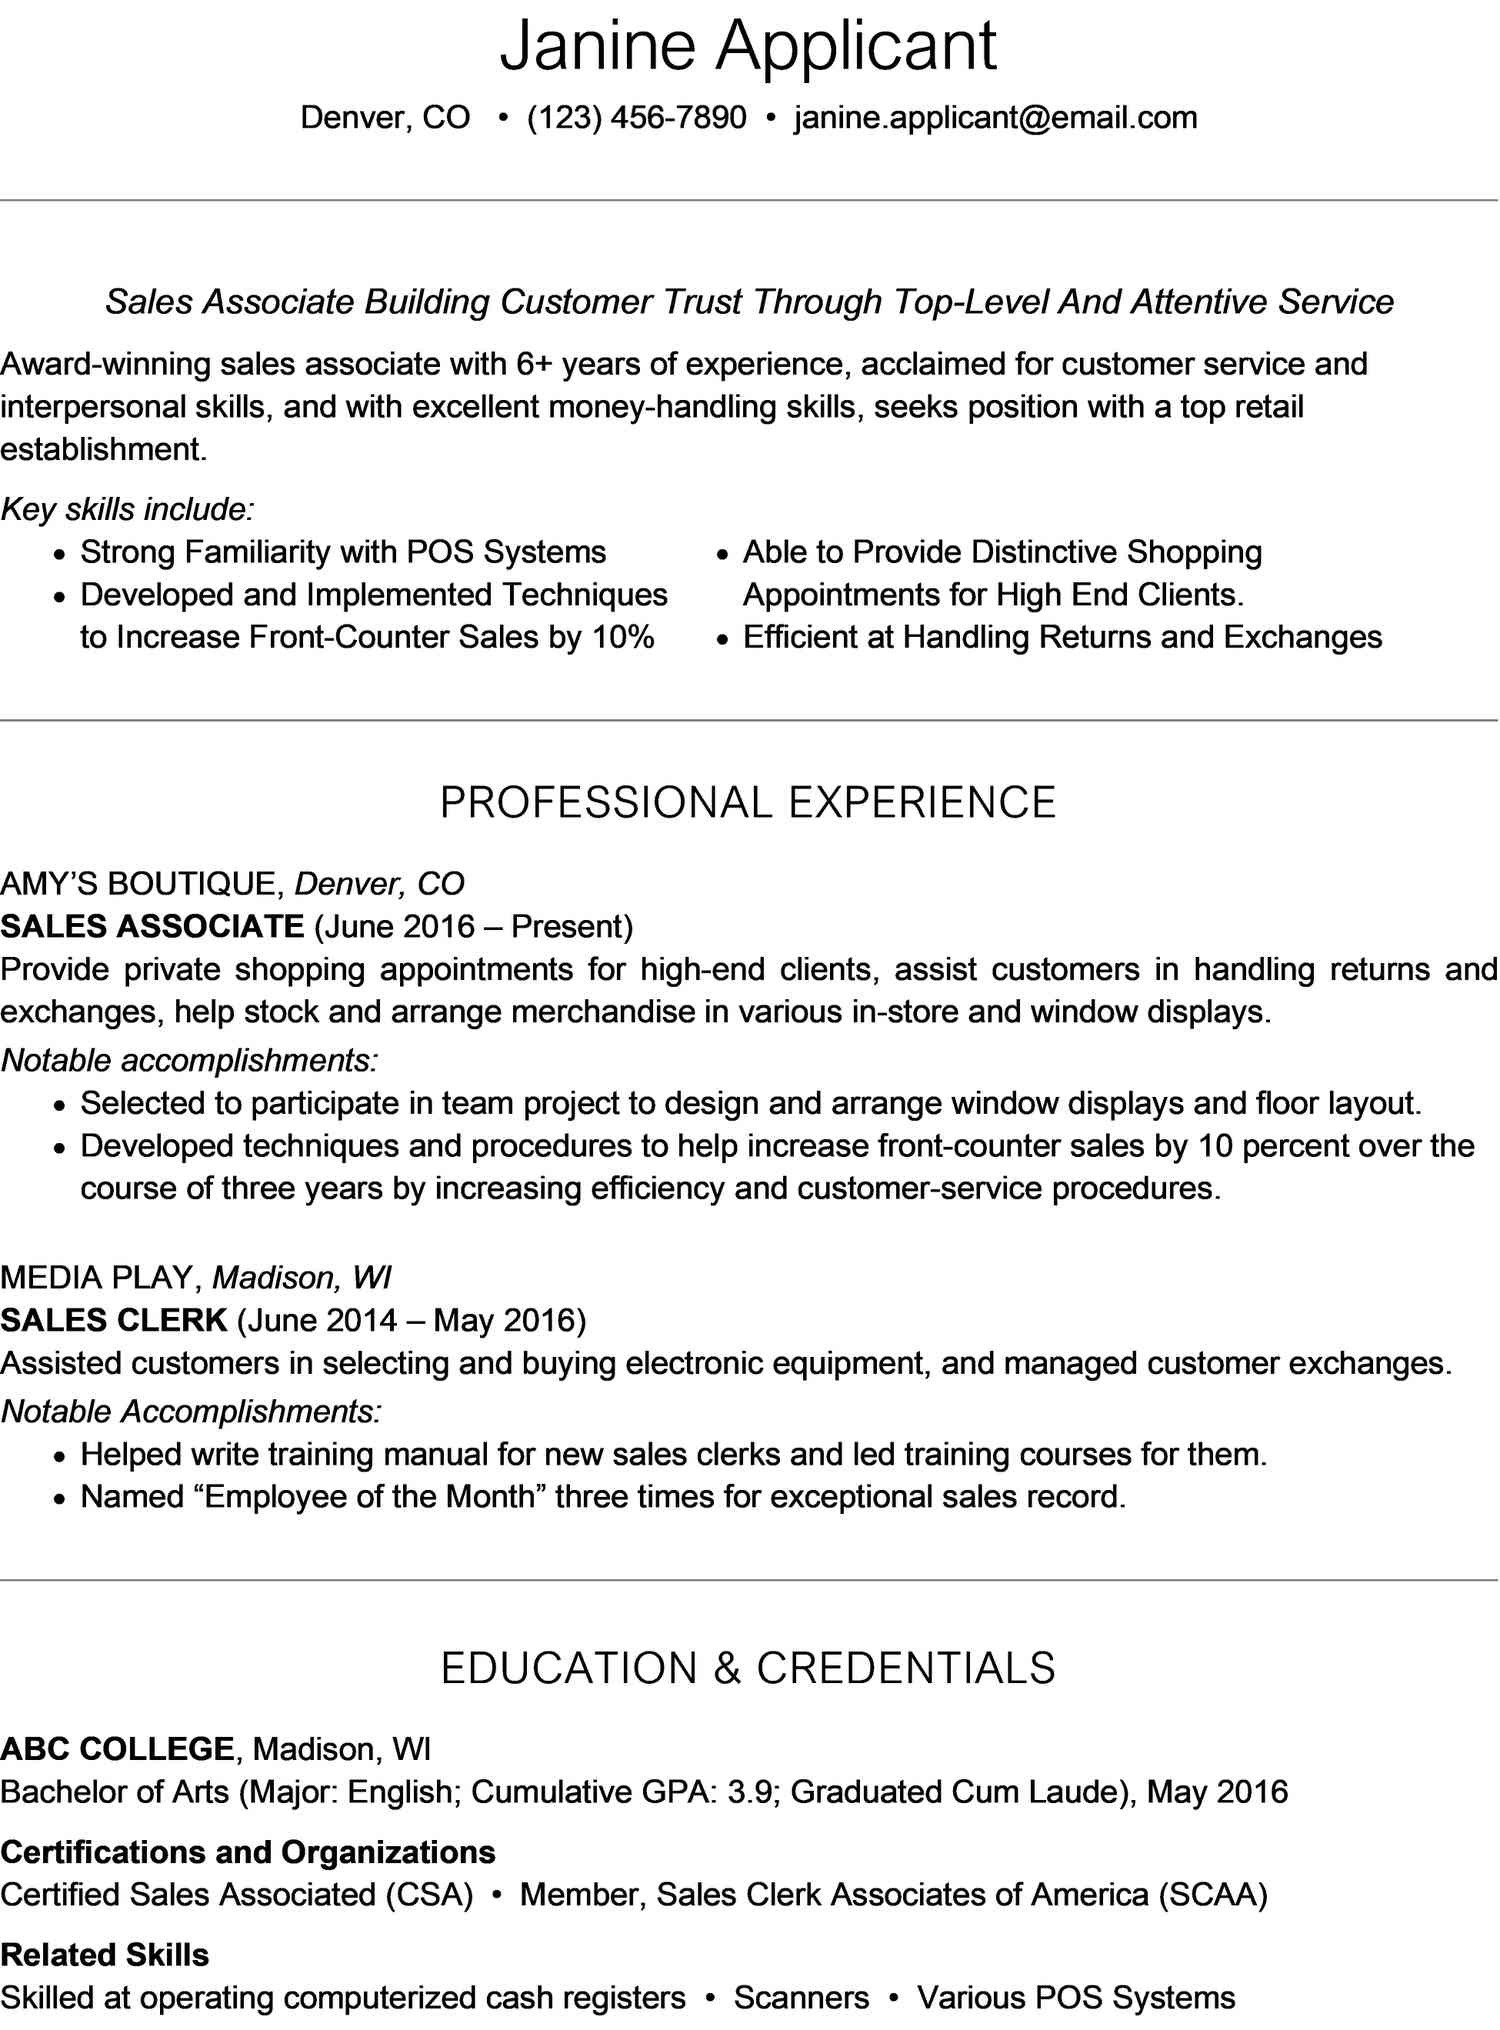 Samples Of Objectives On A Resume for Auto Insurance How to Write A Resume Headline (with Examples)